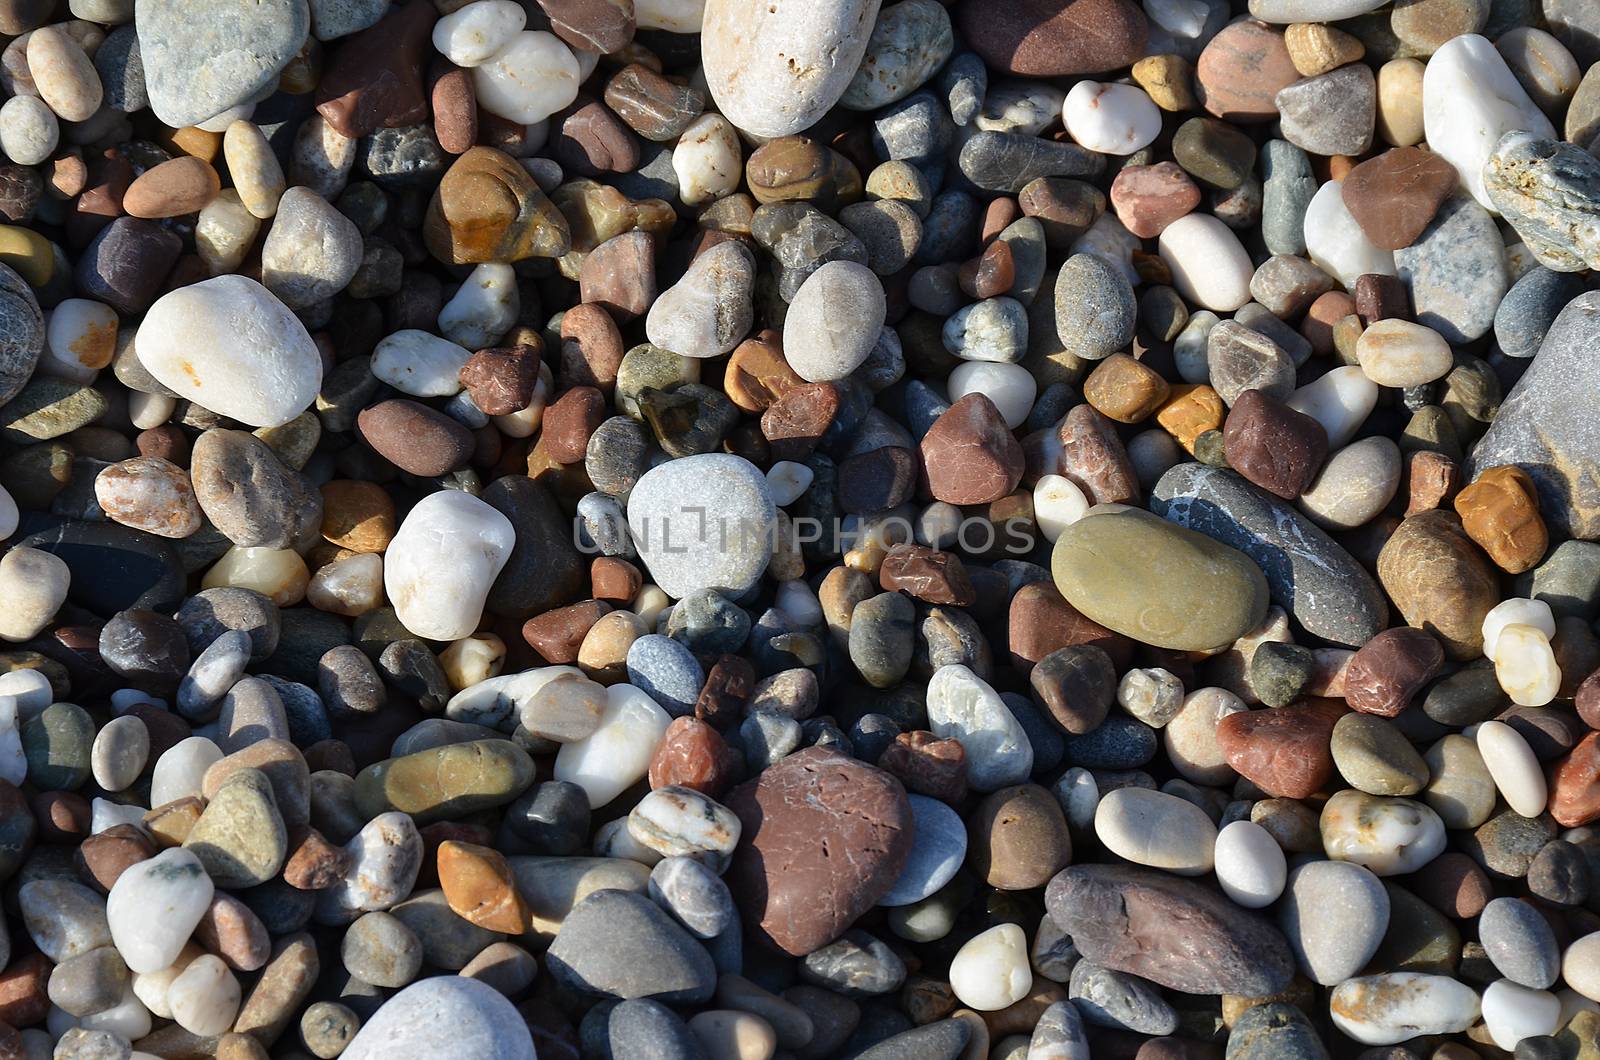 Detail of the various sea pebbles stones by jordano